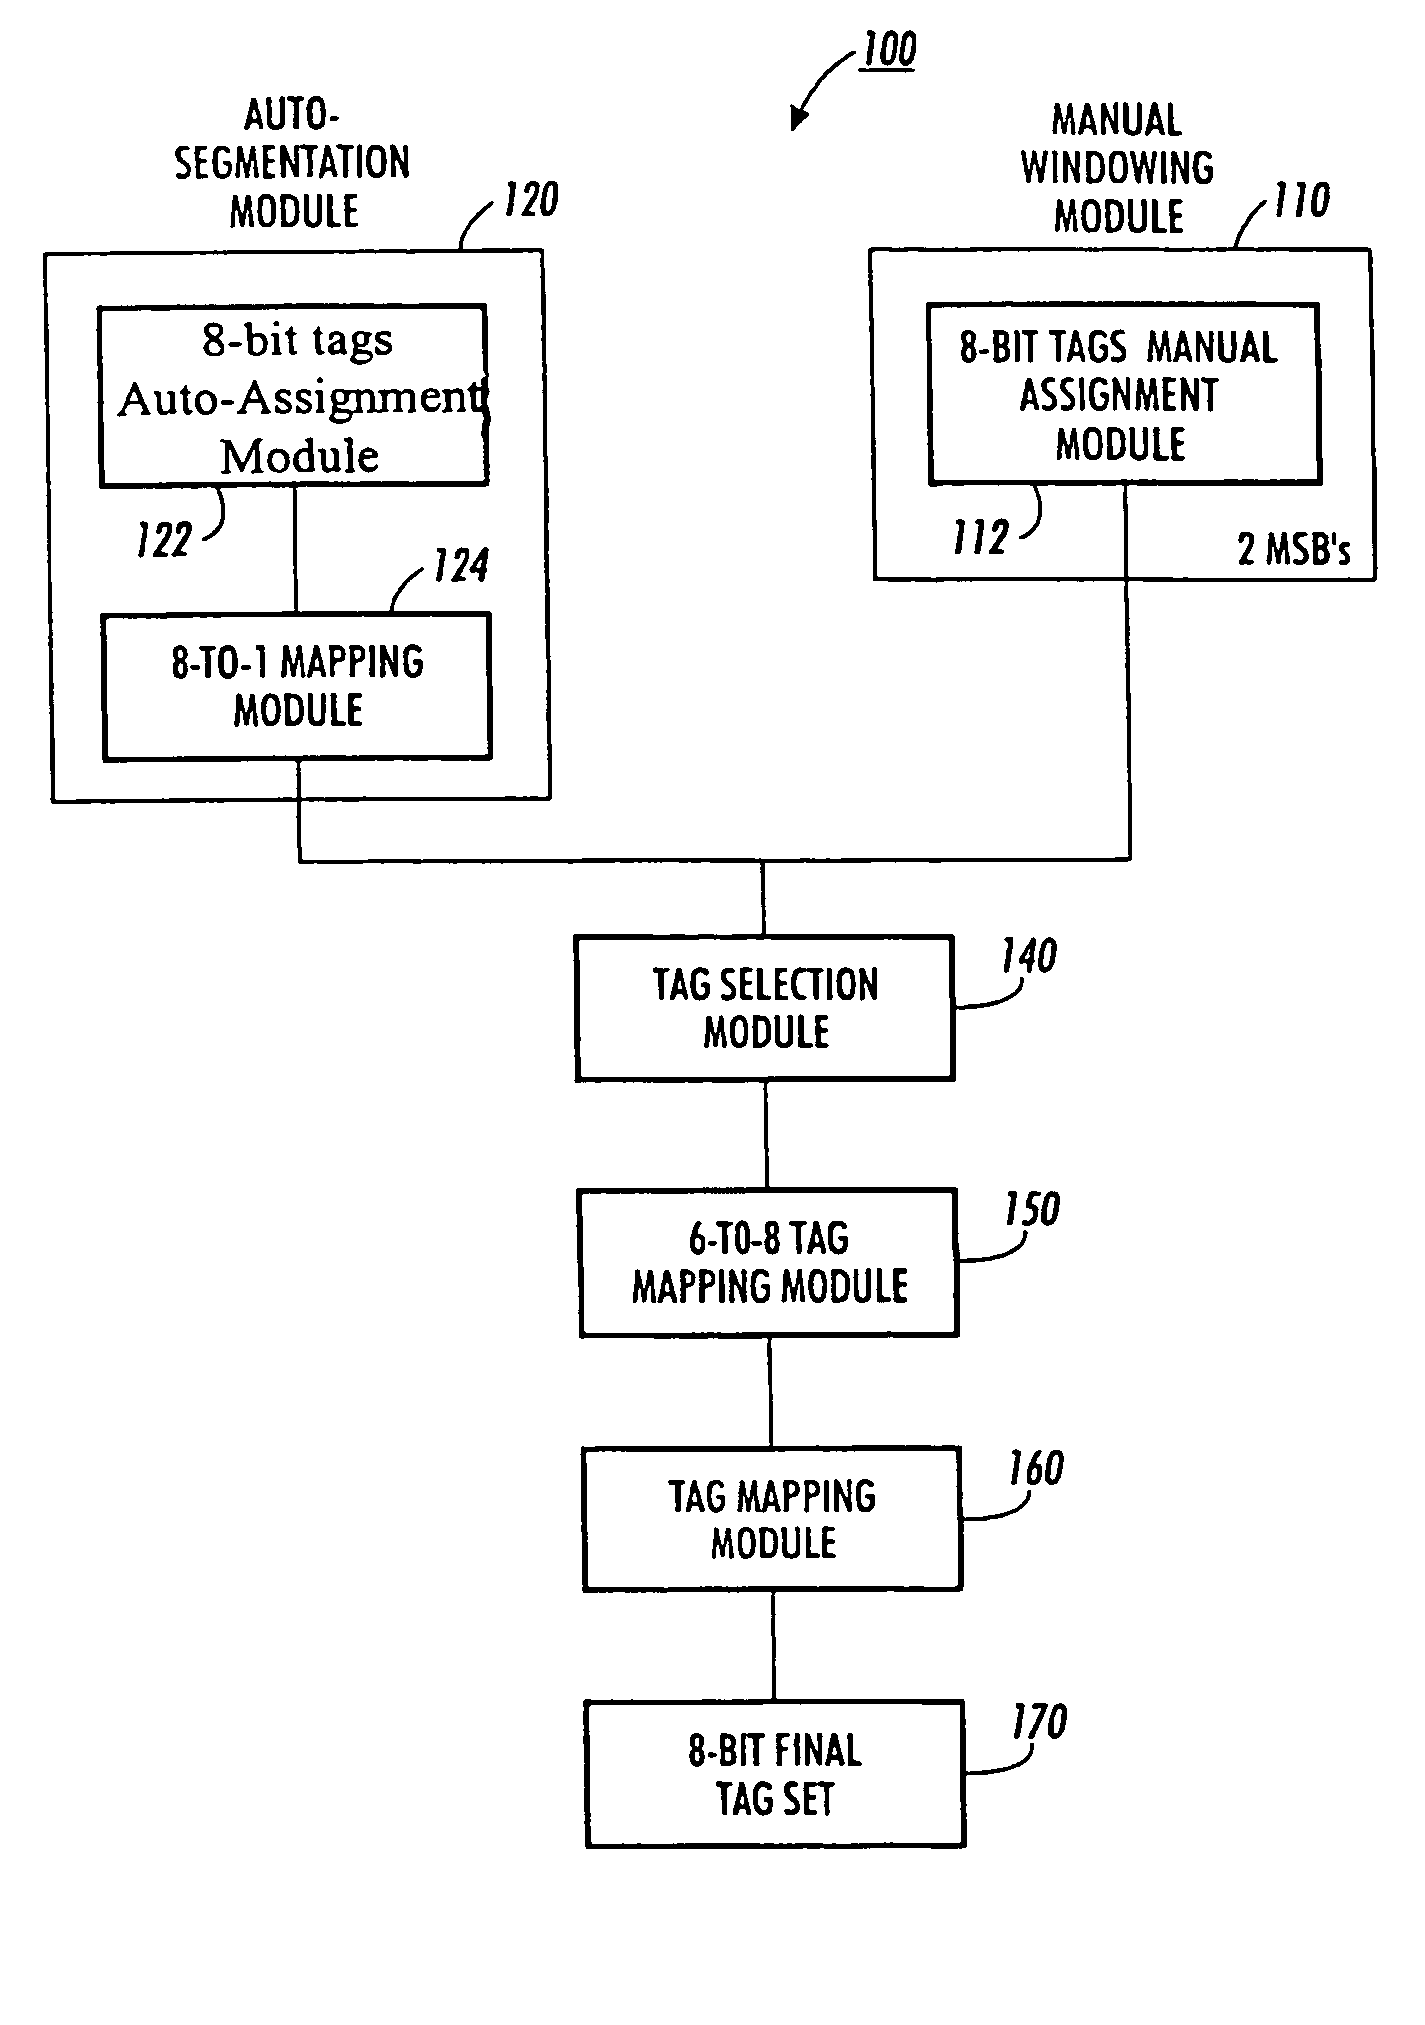 Manual windowing with auto-segmentation assistance in a scanning system